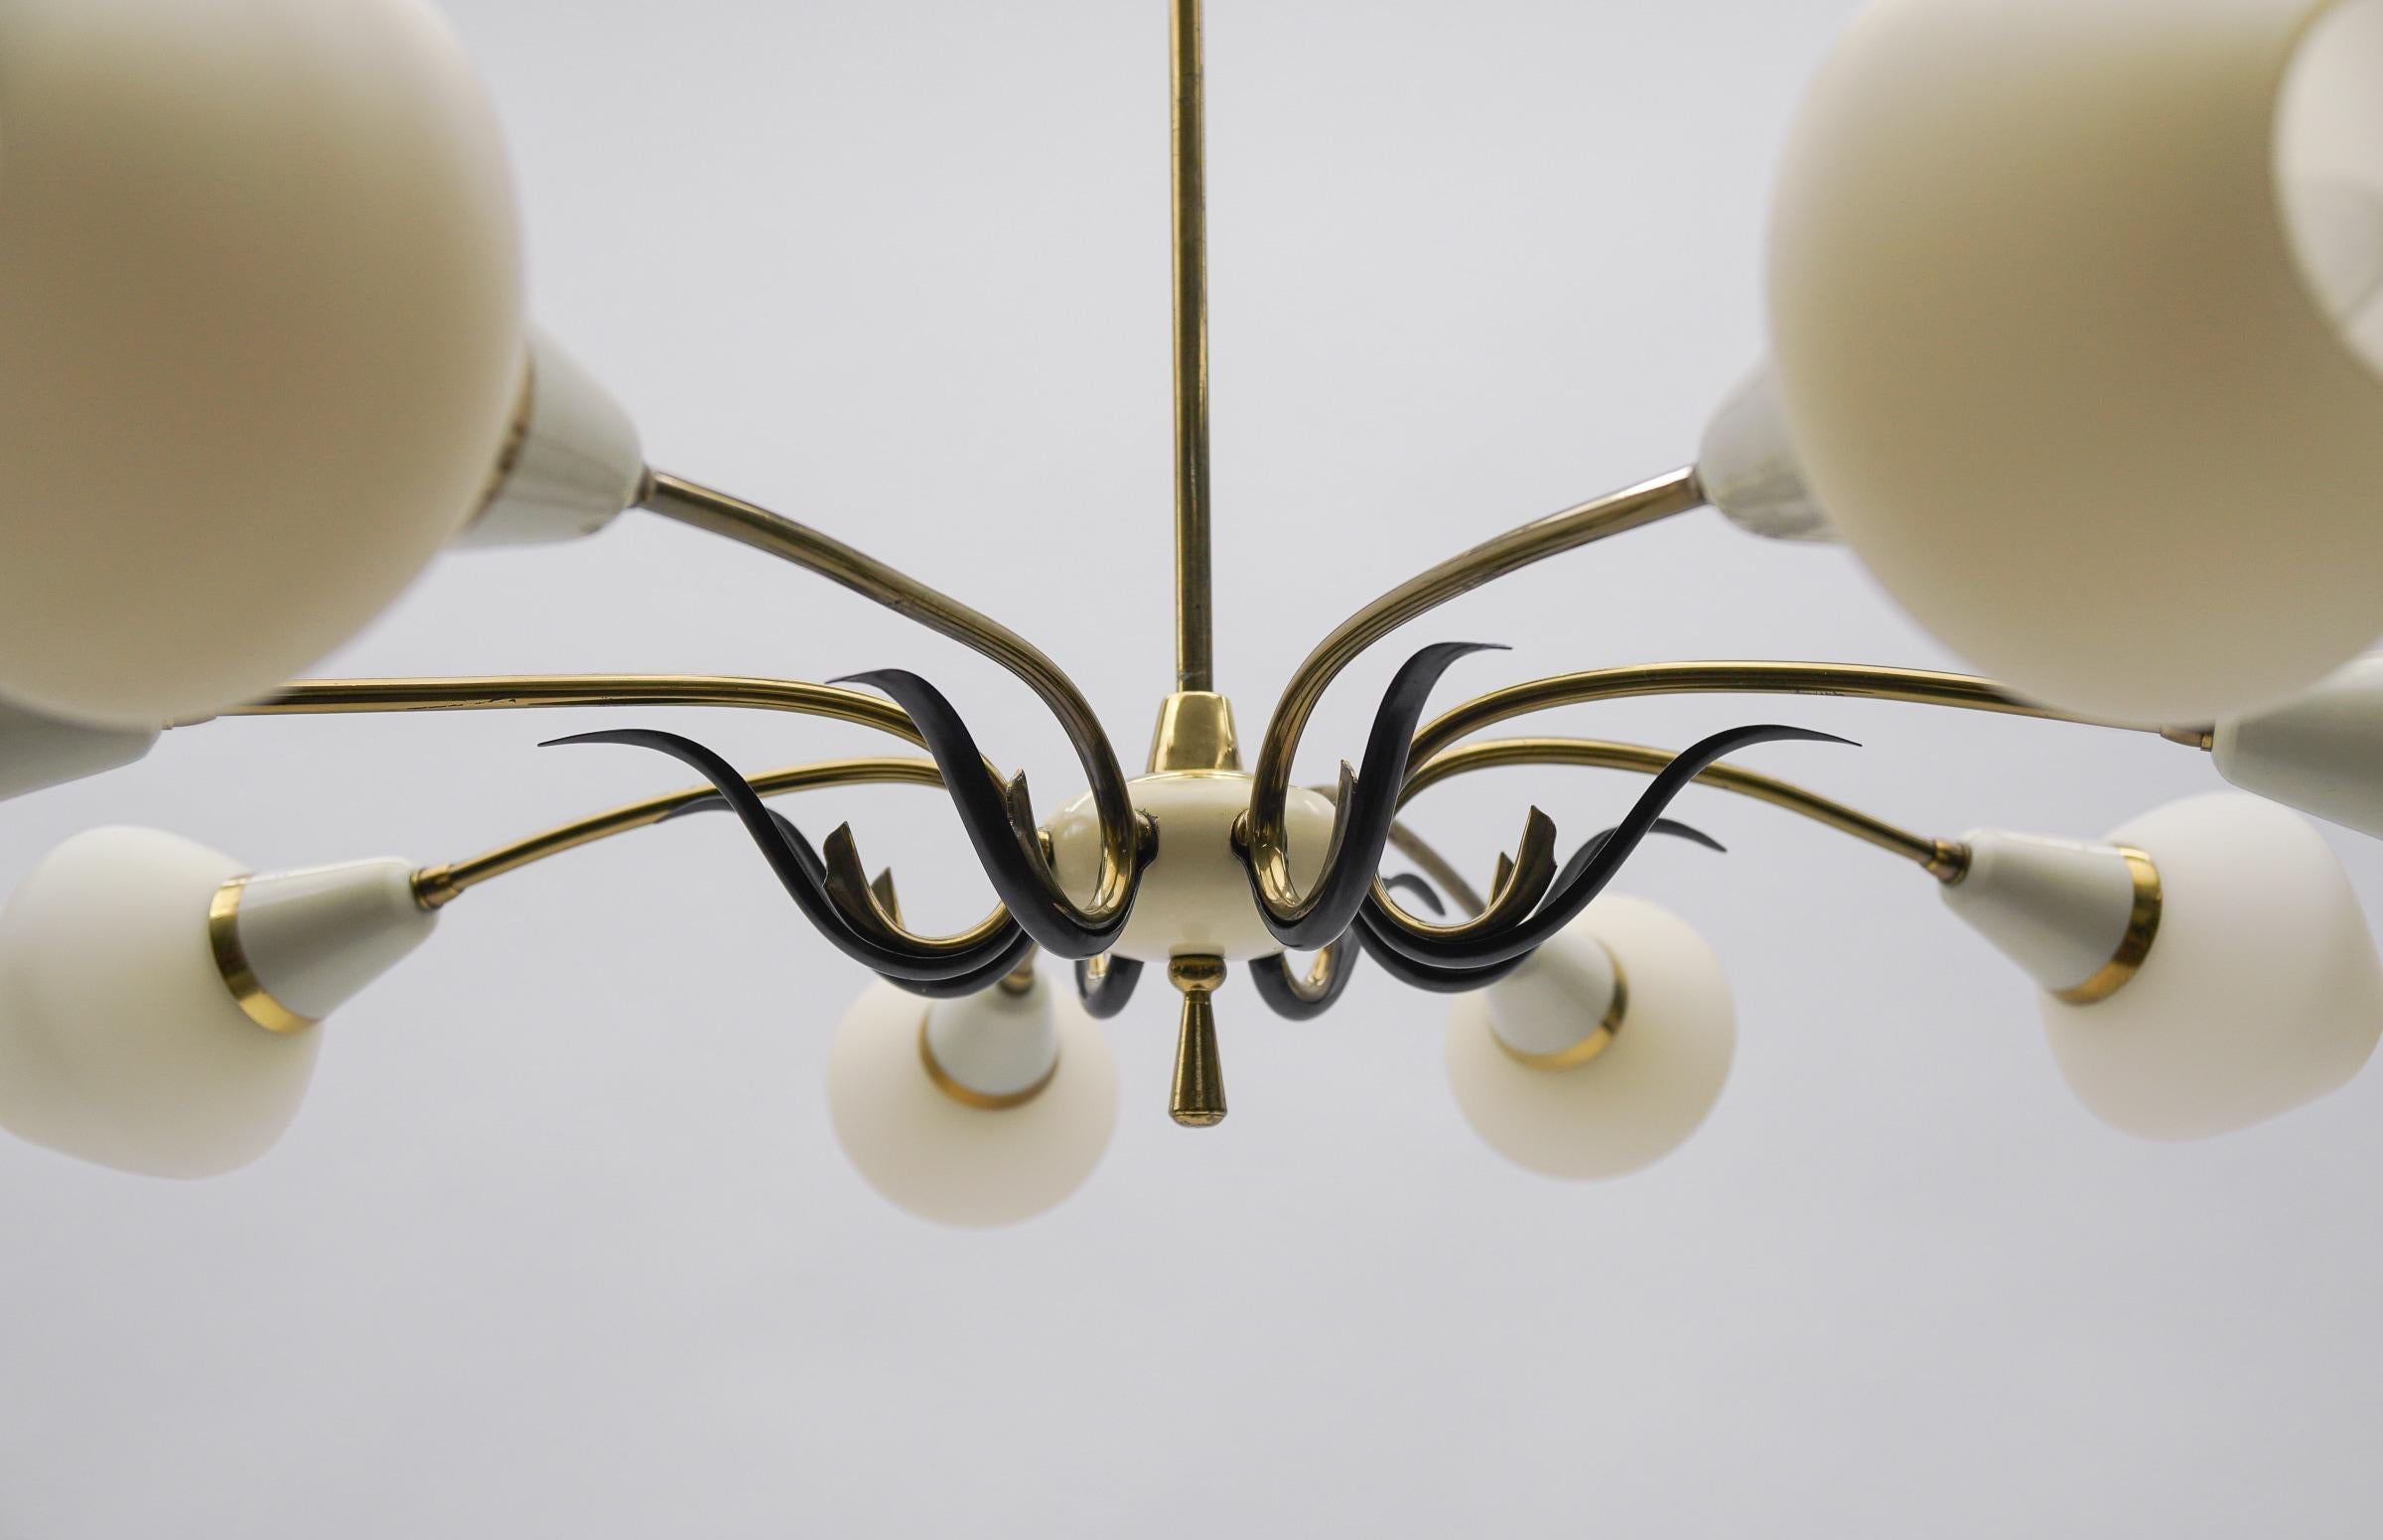 Ceiling 8-Light Sputnik Lamp in the Style of Arteluce, Italy 1950s For Sale 1